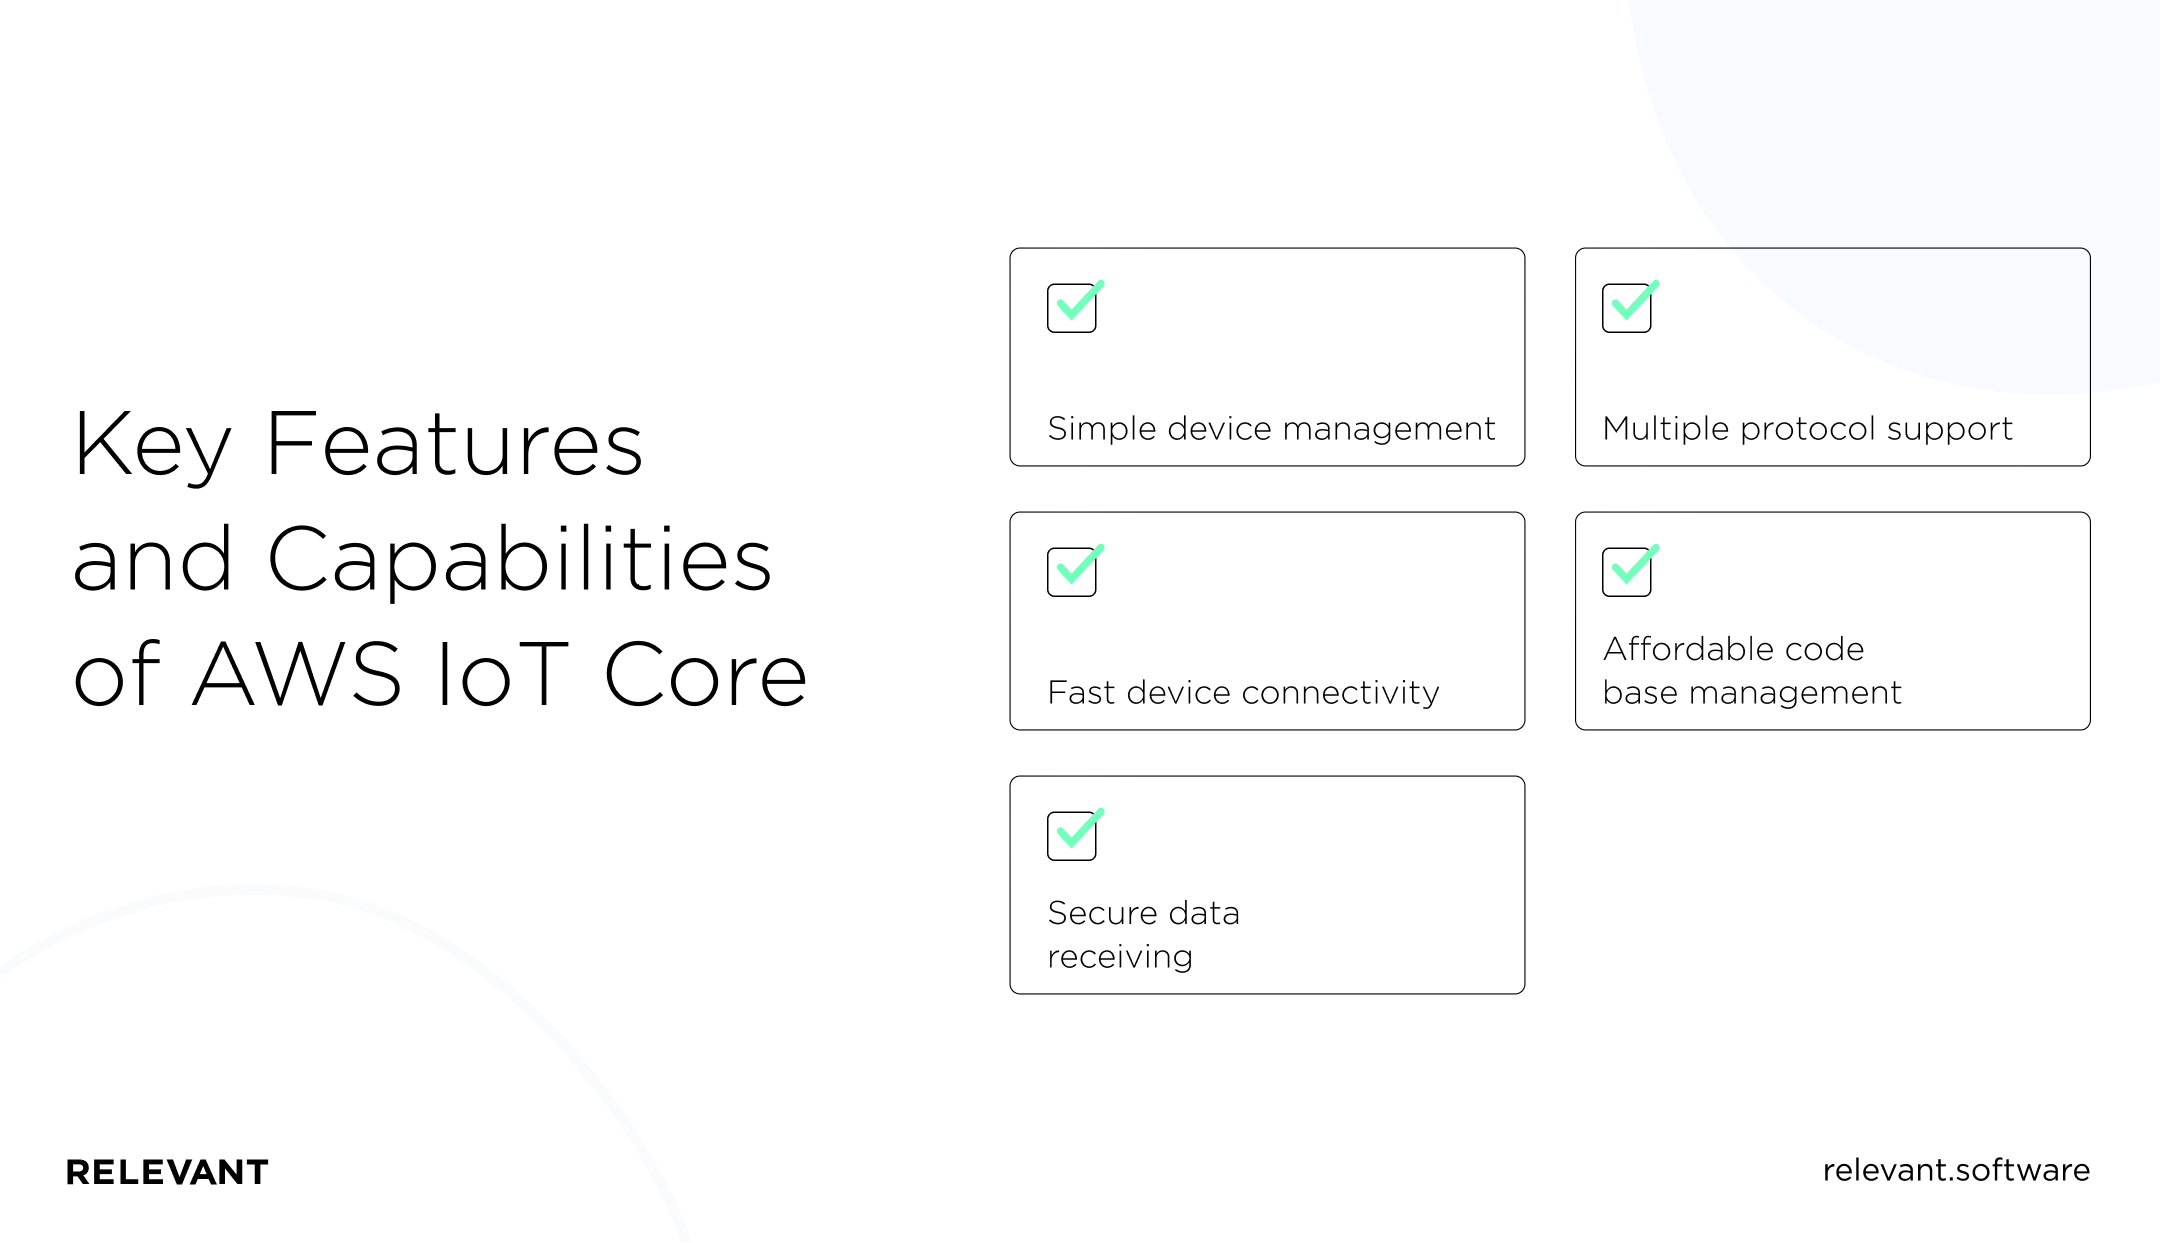 Key Features and Capabilities of AWS IoT Core